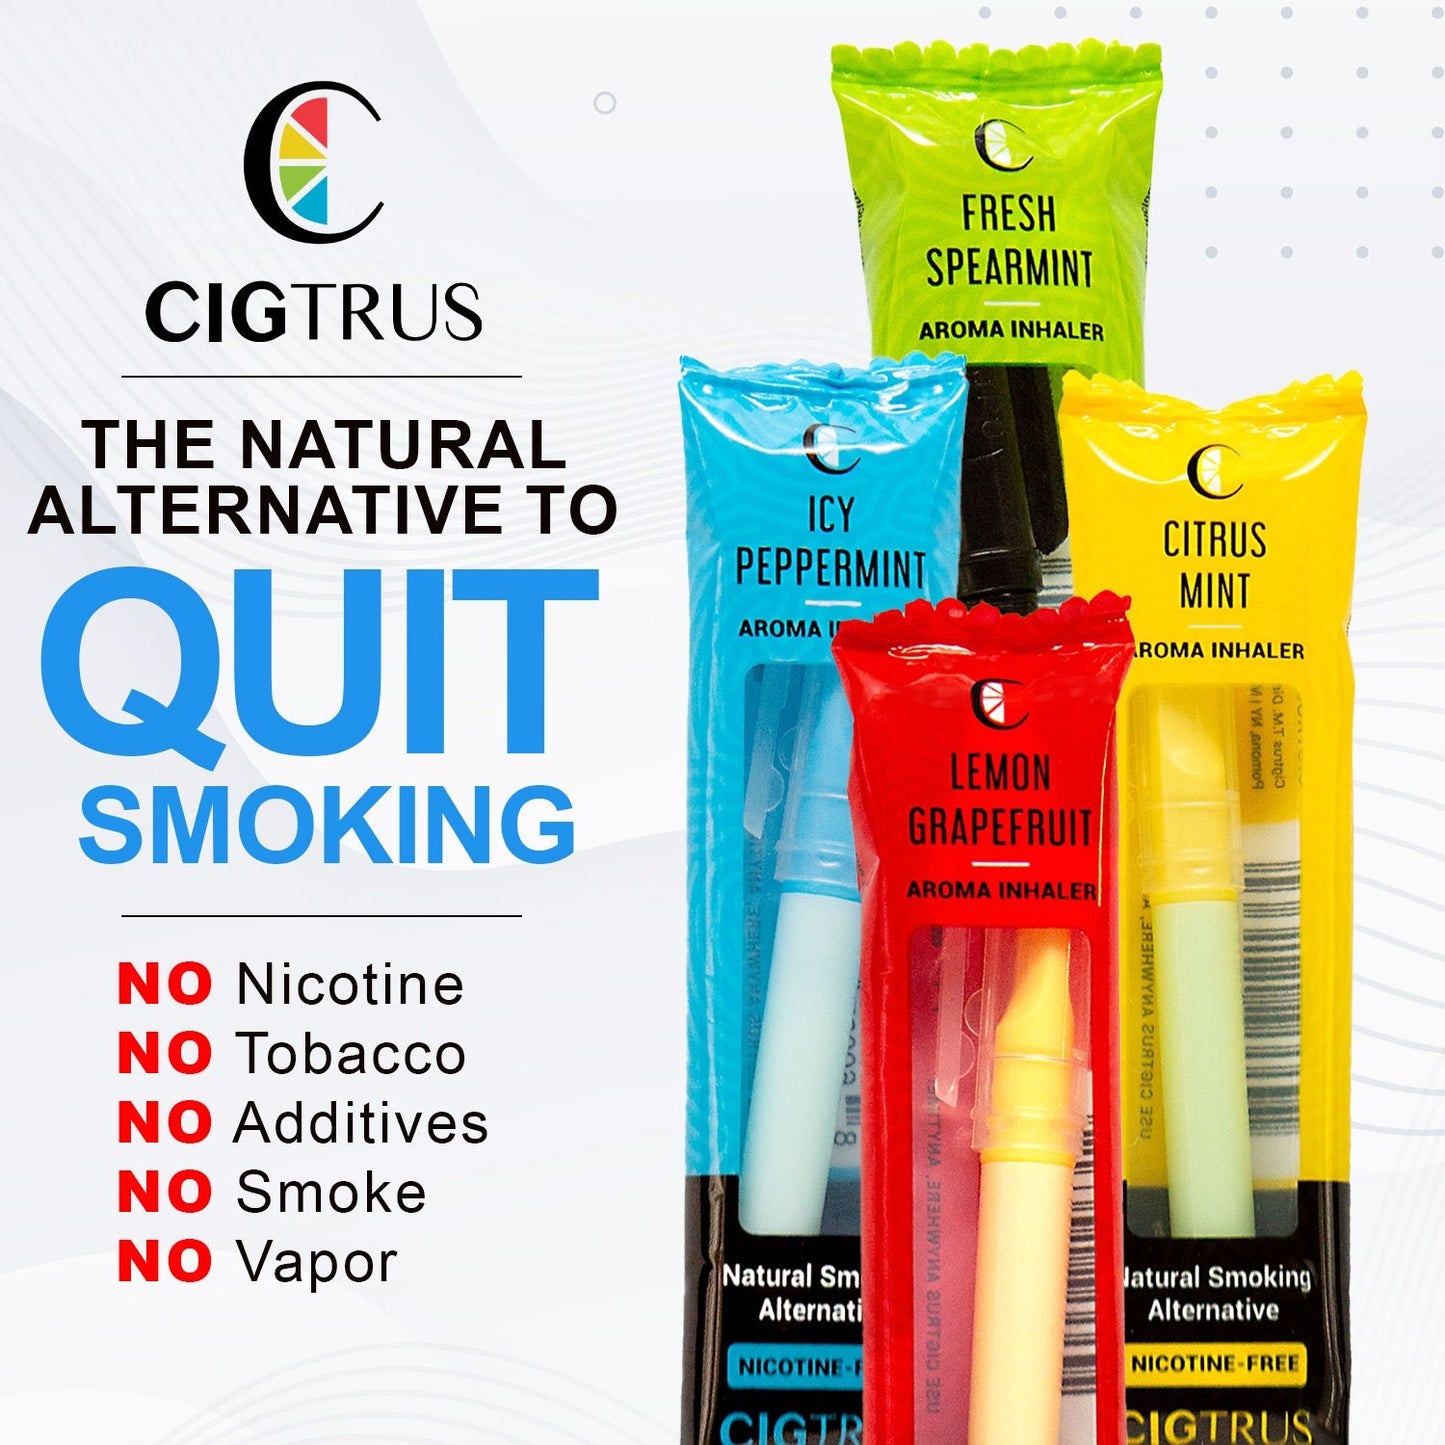 Cigtrus Aromatic Smokeless Oxygen Air Inhaler Oral Fixation Relief Natural Quit Aid Behavioral Support – Icy Peppermint 3 Pack - cigtrus.comcigtrus.com